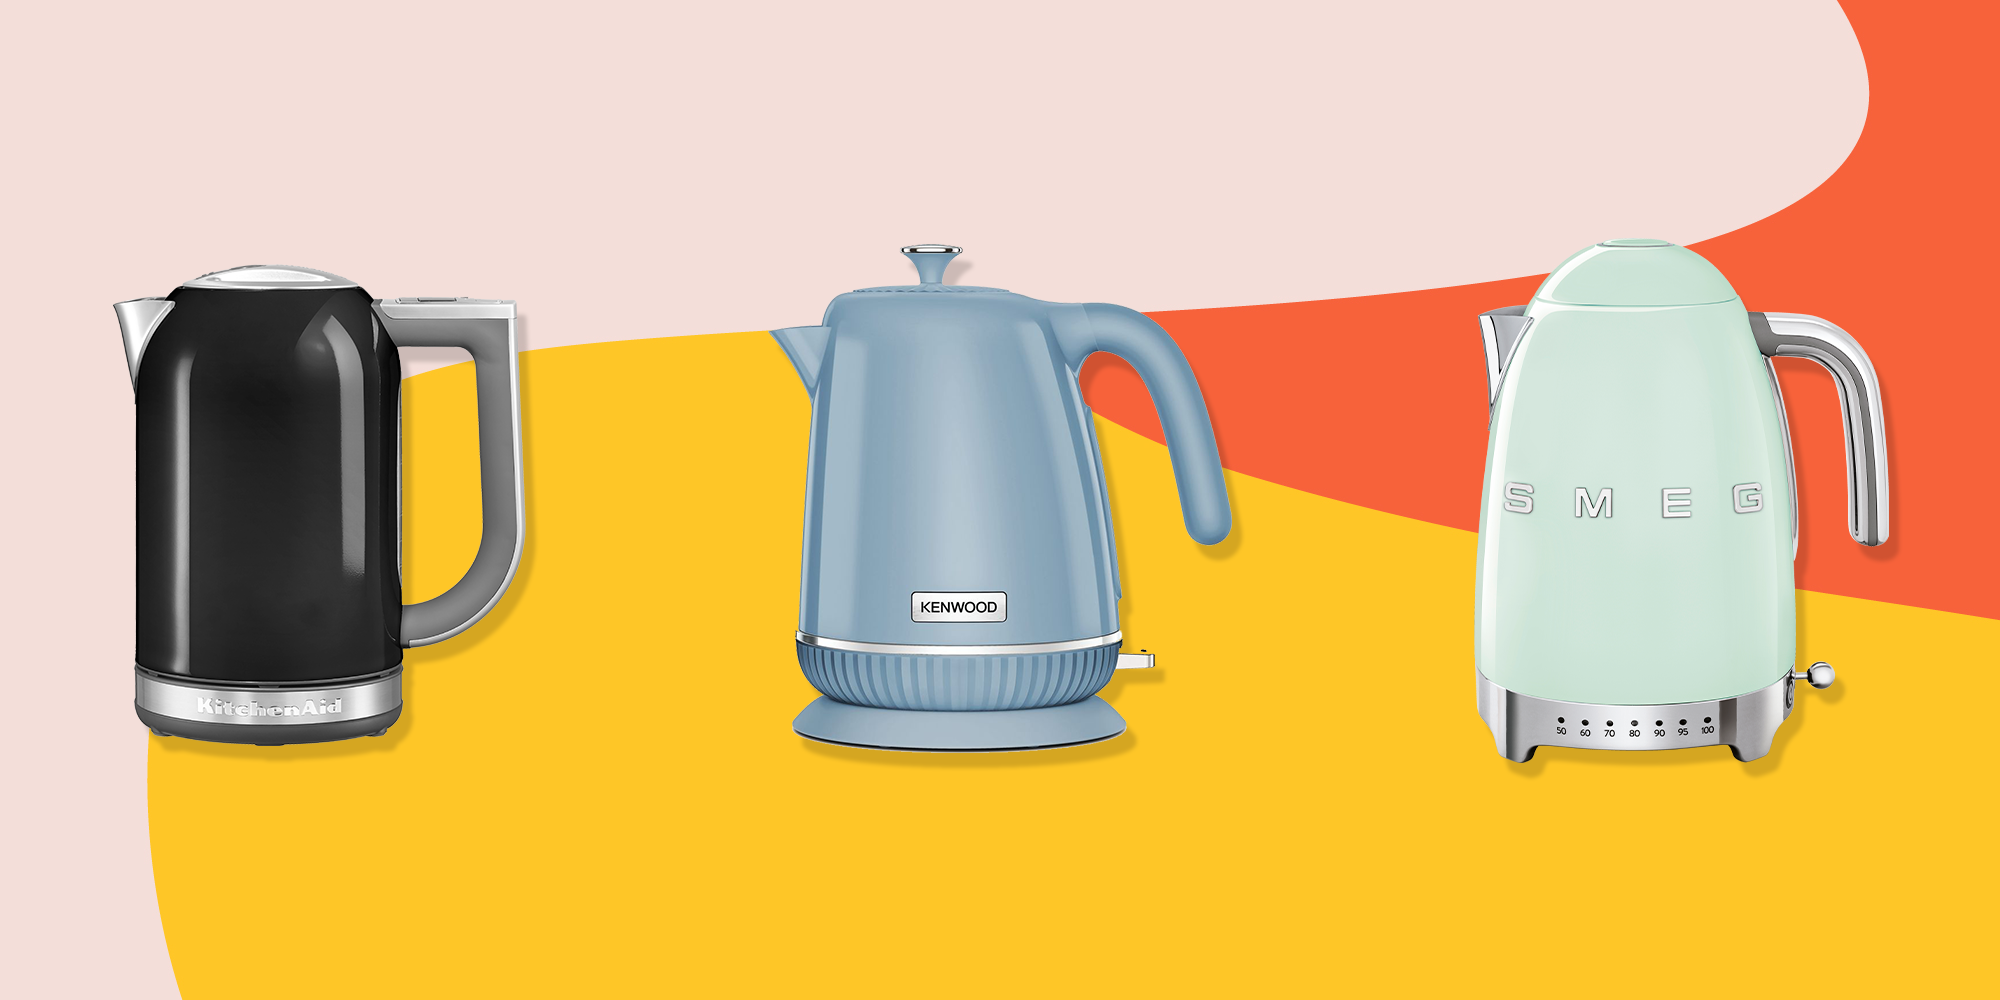 Russell Hobbs Honeycomb Kettle 26051 Review